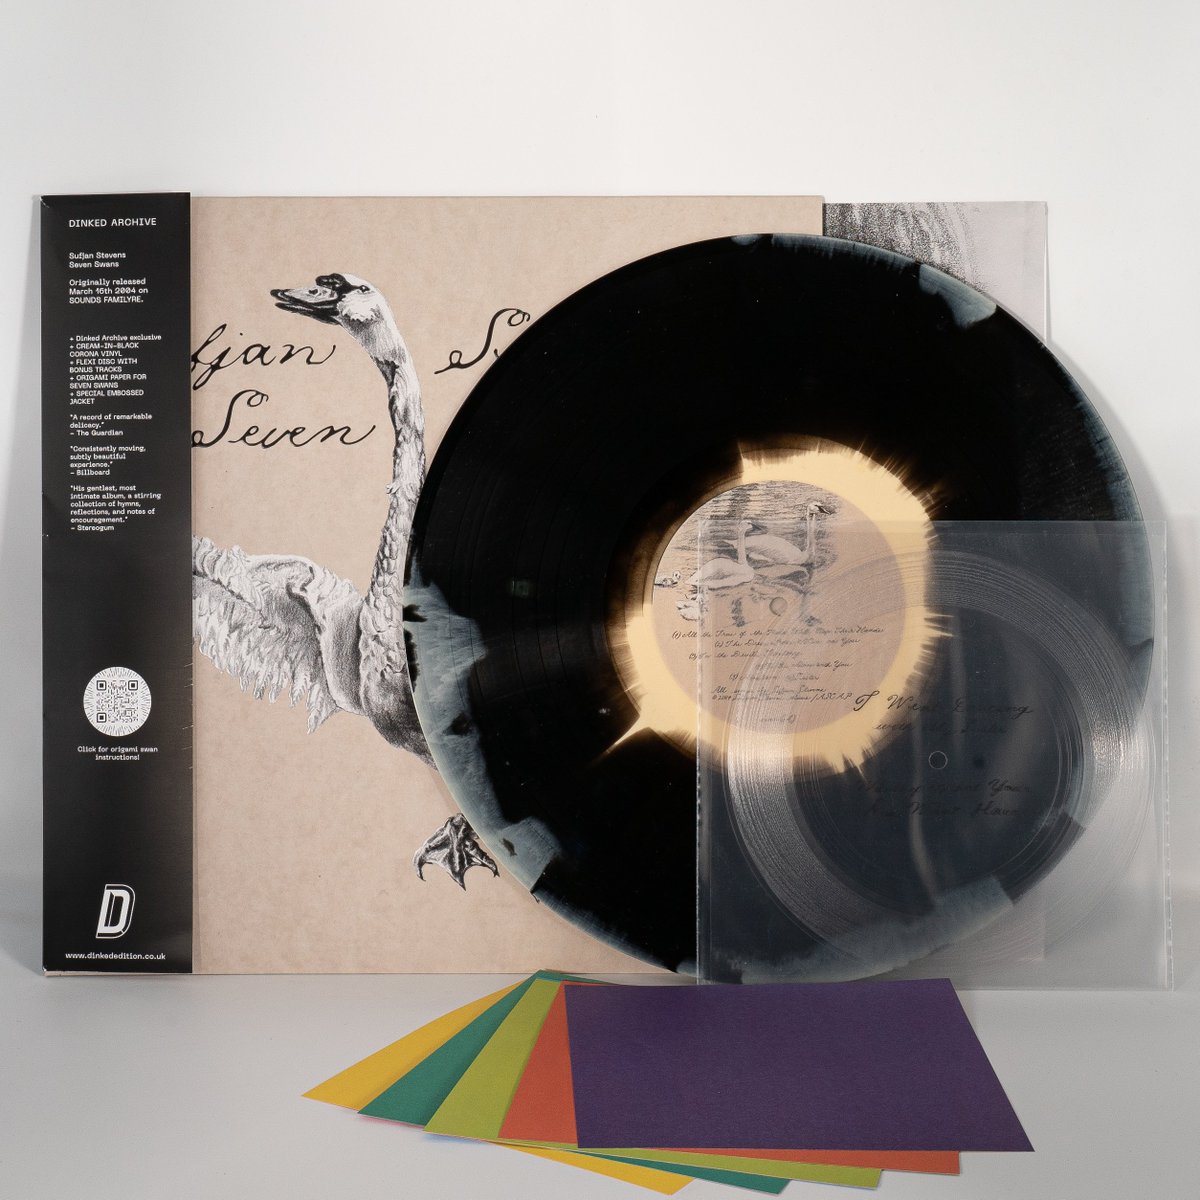 DINKED ARCHIVE 19: 'Seven Swans (20th Anniversary Edition)' by Sufjan Stevens Sufjan’s @dinkededition reissue features an exclusive colourway, obi-strip, embossed sleeve, flexi disc, and seven sheets of origami paper for swan crafting 🦢 @asthmatickitty normanrecords.com/records/203514…